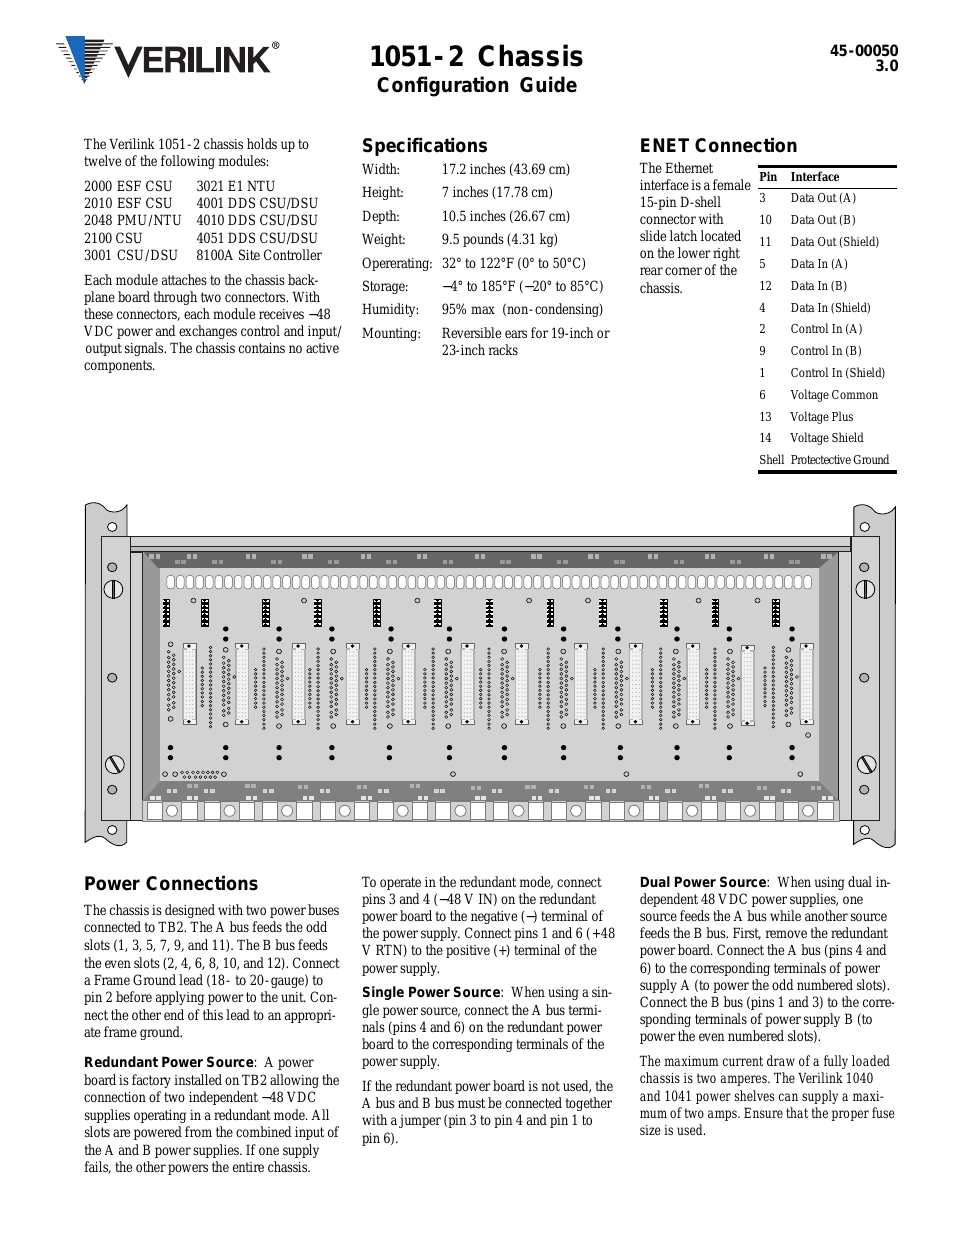 1051-3 Chassis (CG) Configuration/Installation Guide